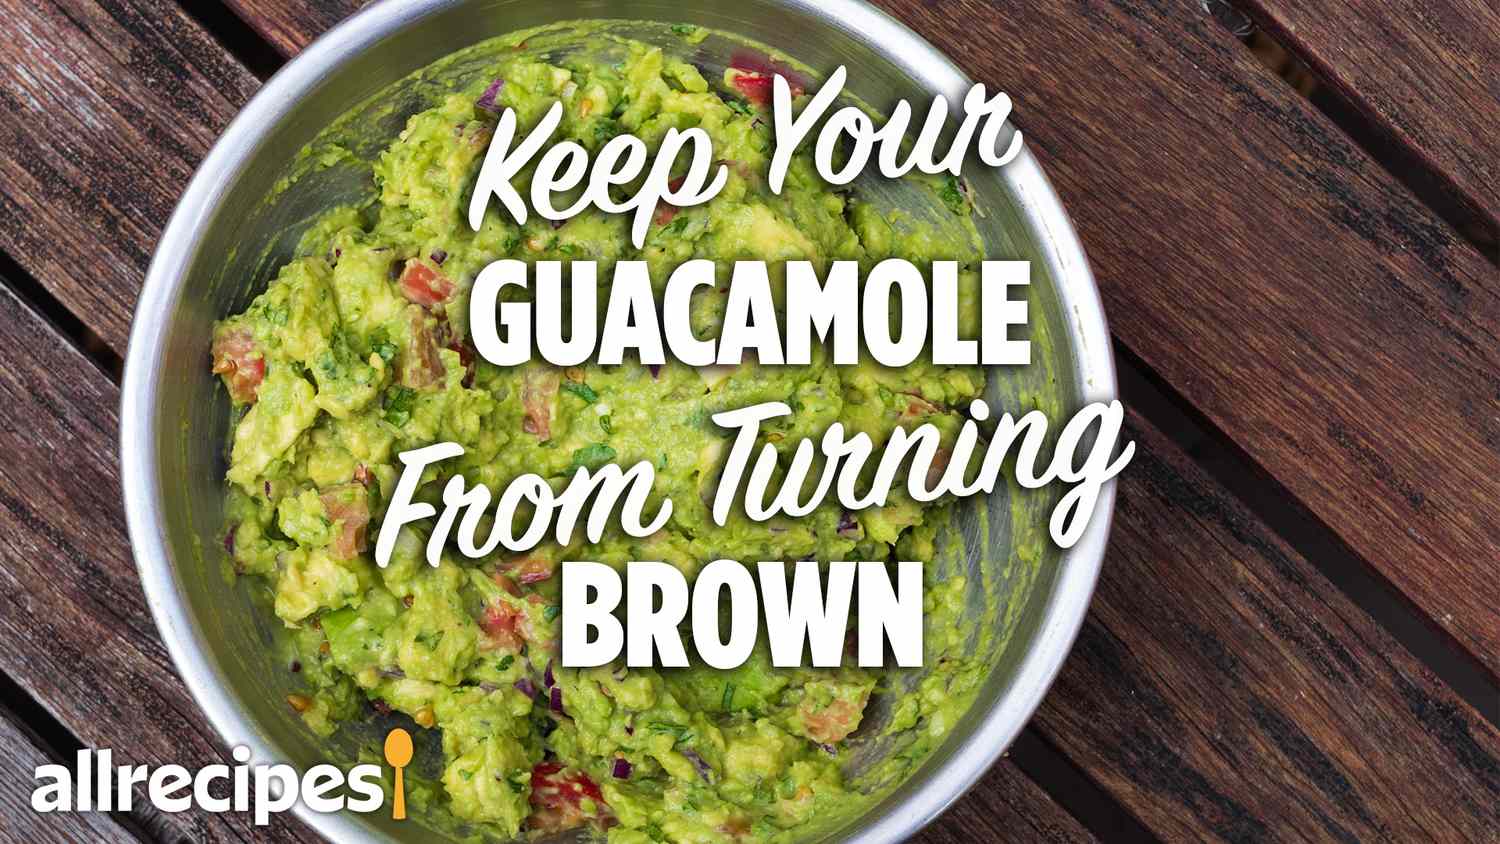 This Easy Trick Keeps Your Guacamole From Turning Brown